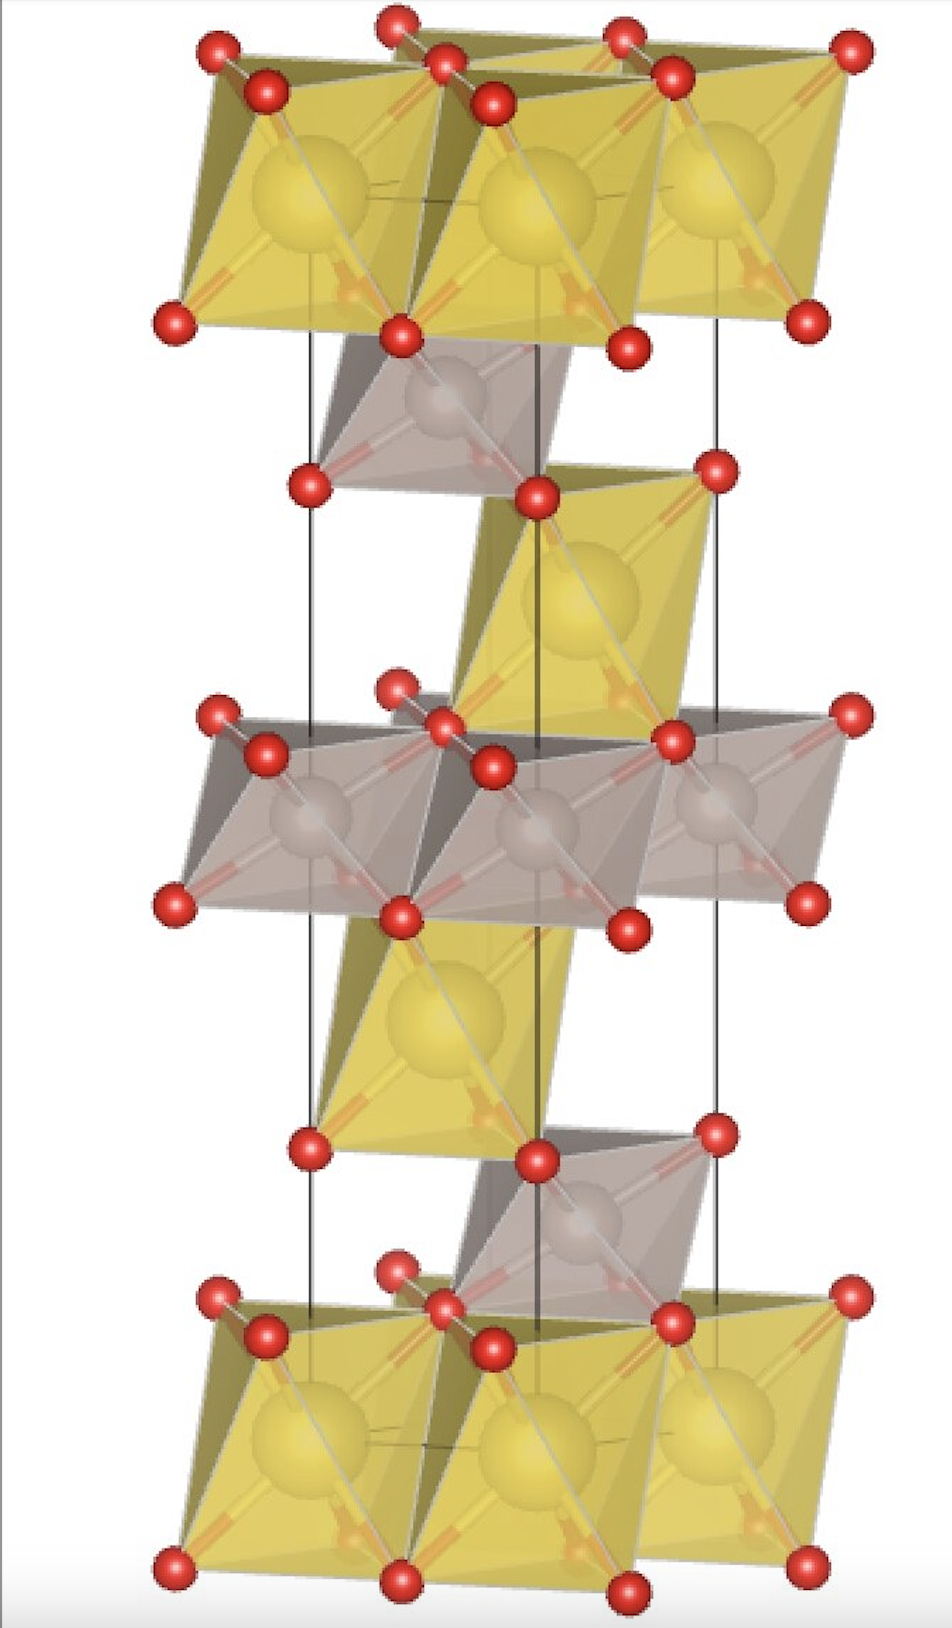 Crystal Structure of NaRuO2: Grey octahedra show Ru atoms coordinated by oxygen (red balls). Yellow octahedra show Na atoms coordinated by oxygen. Credit: Ortiz et al